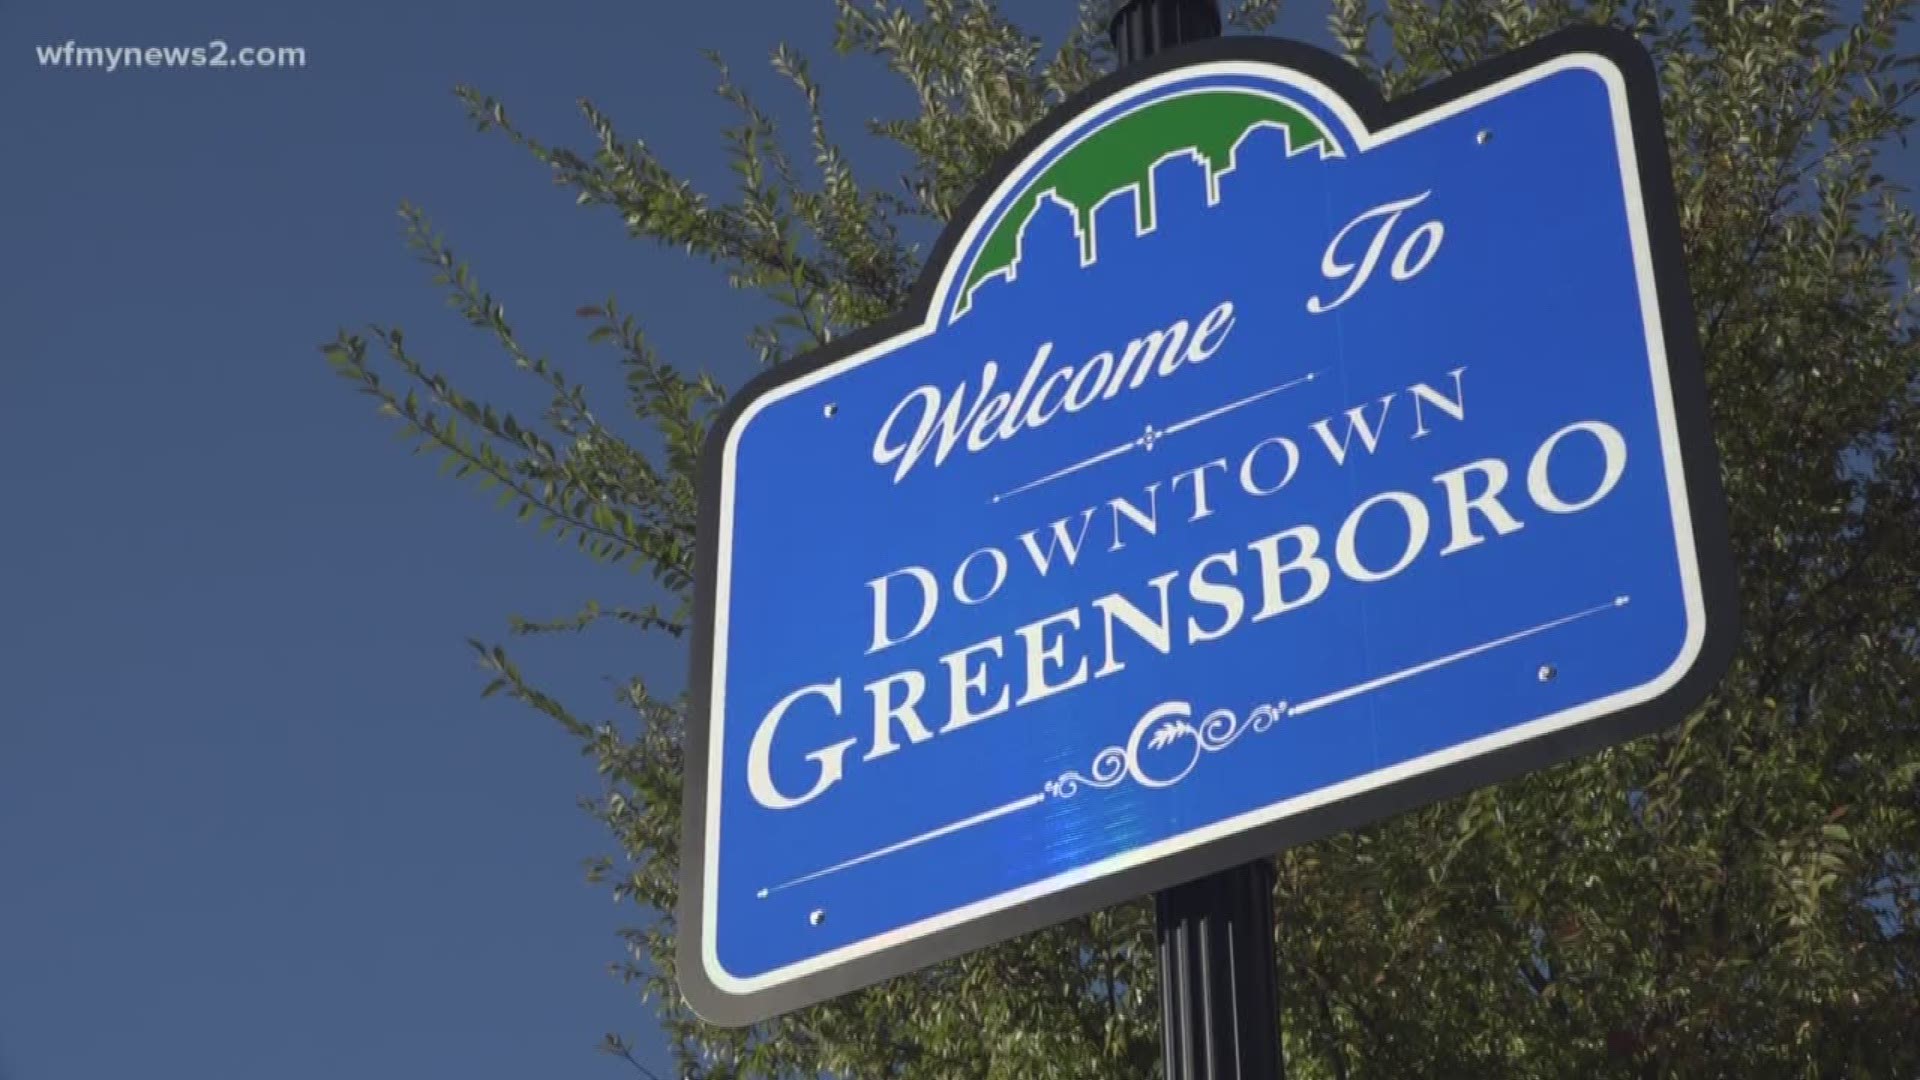 Just two years into the Greensboro Chamber of Commerce's 5-year growth plan, they say they're already starting to surpass their goals.